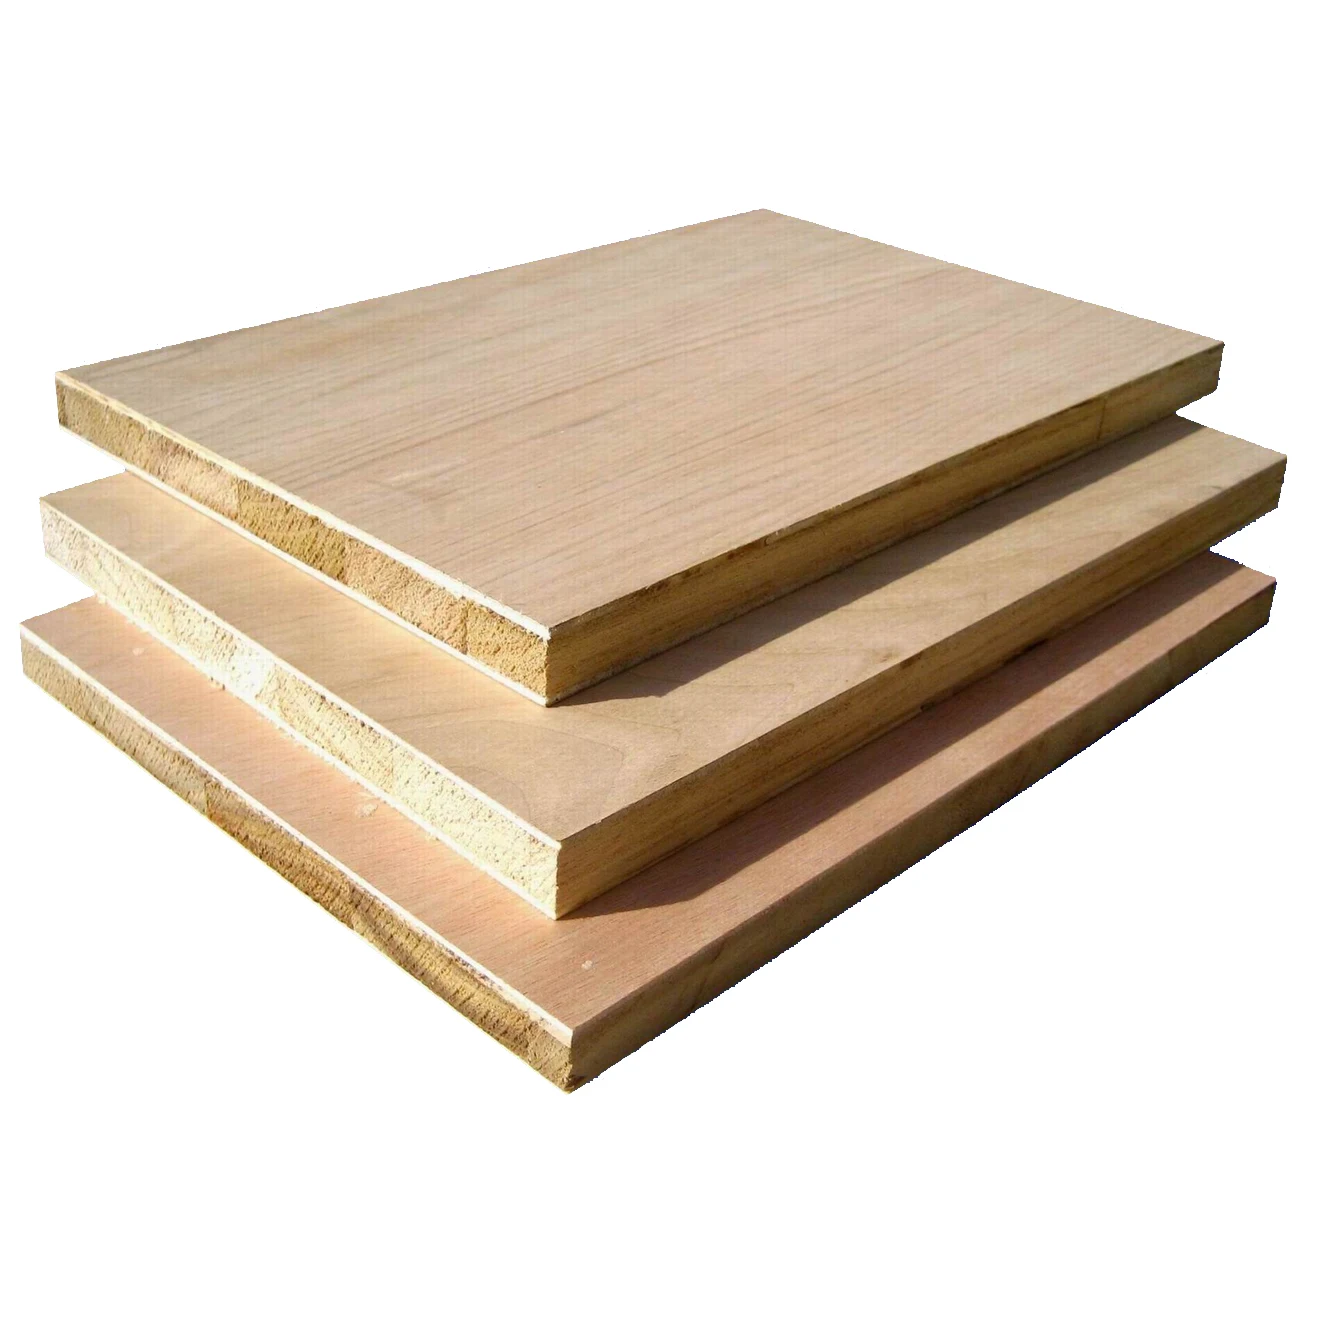 Hot Selling Guaranteed Quality Popular Product Factory Wholesale Cheap Price Lumber Solid Wood Block Boards (1600498938897)